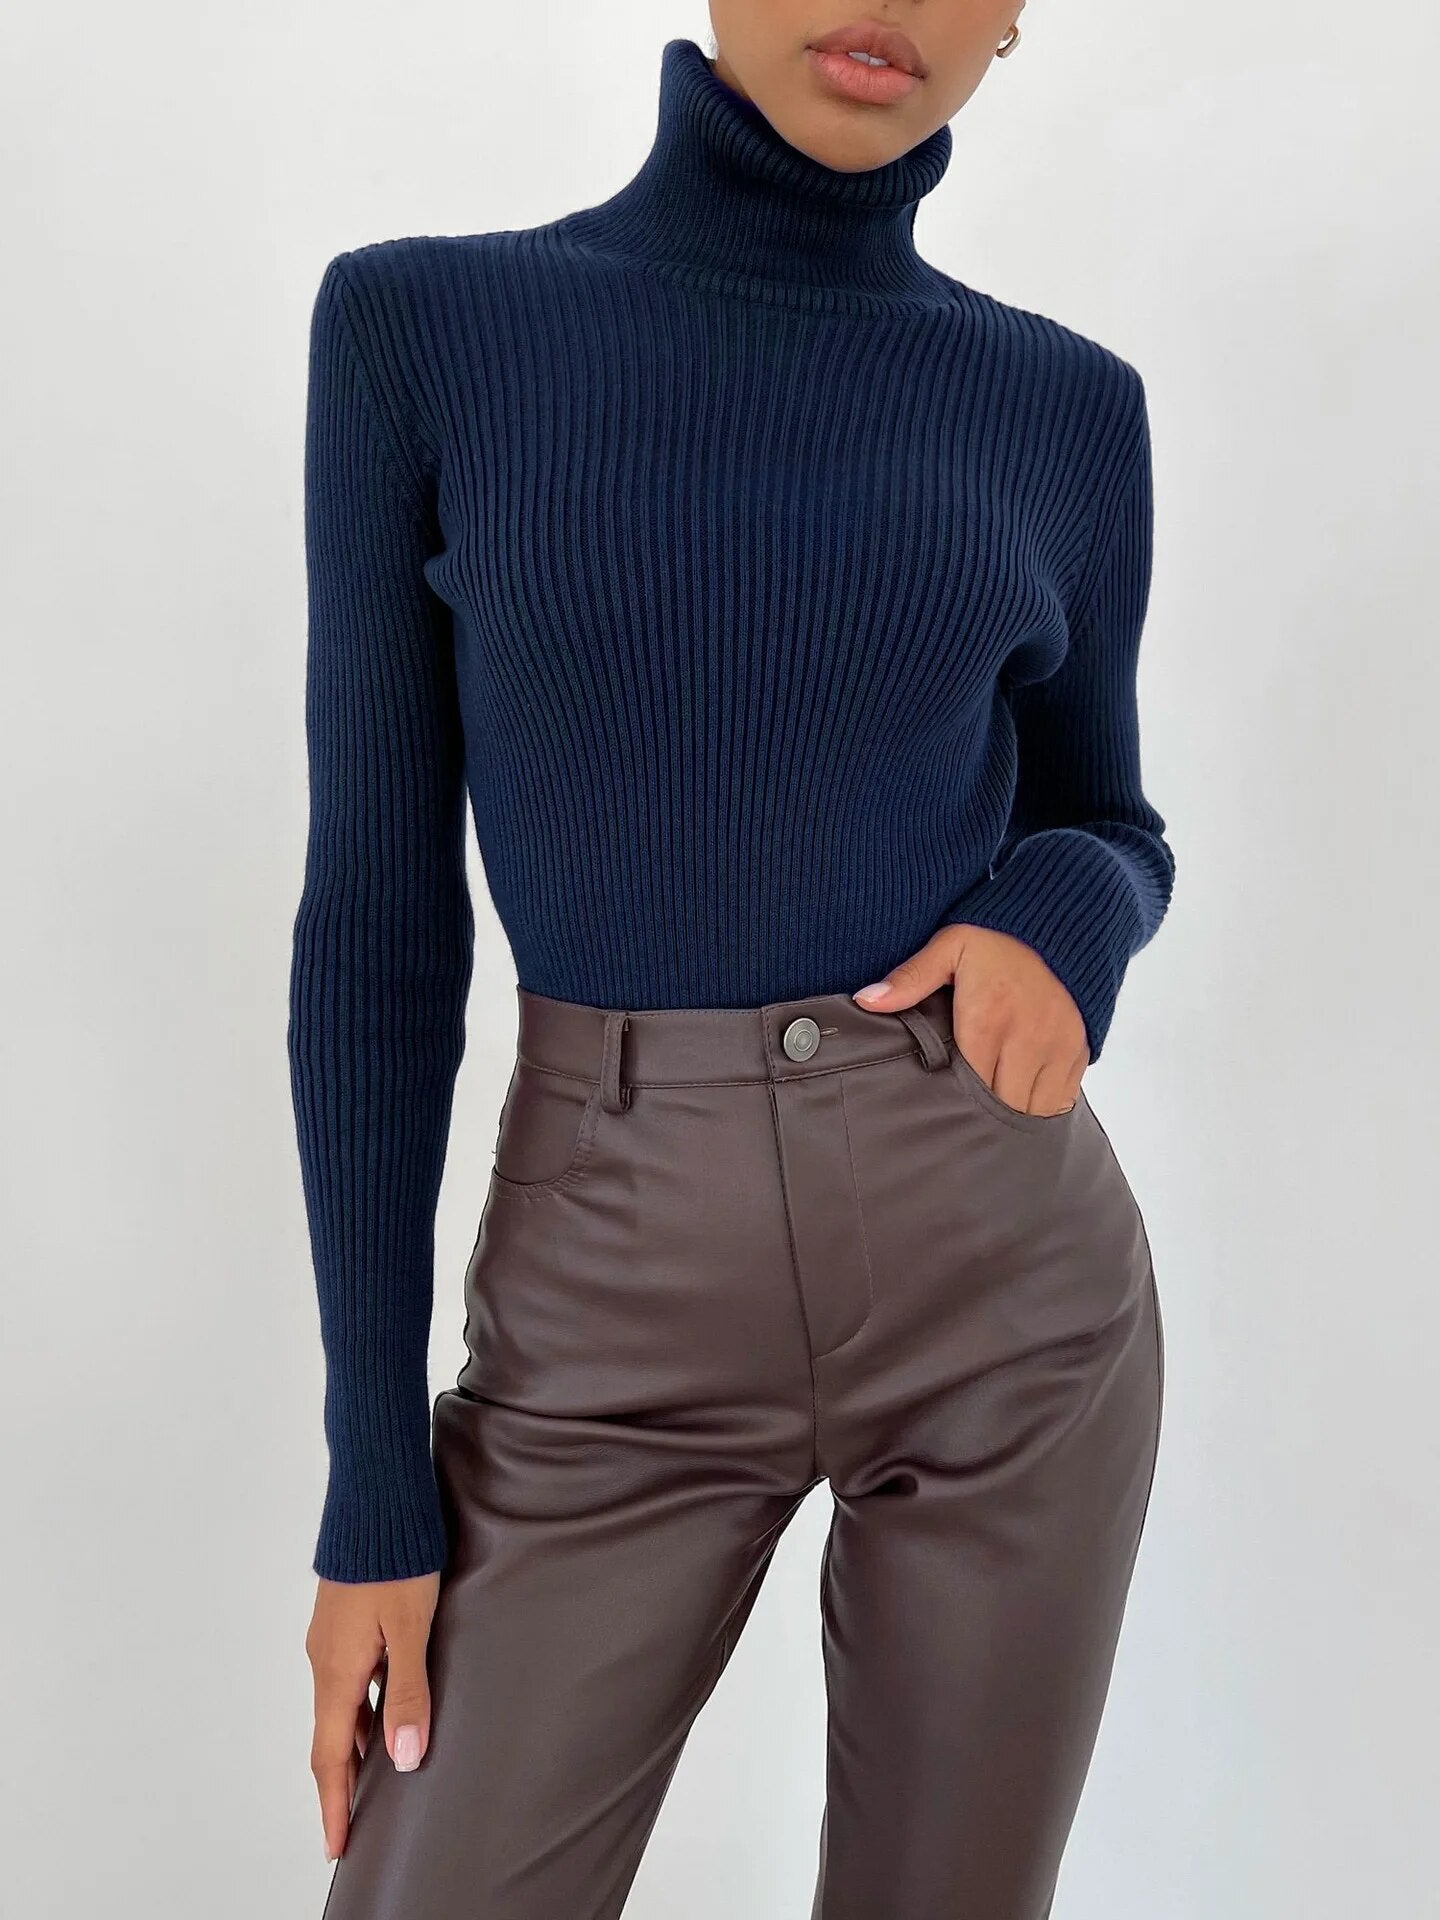 2023 New Turtleneck Sweater Soft And Warm